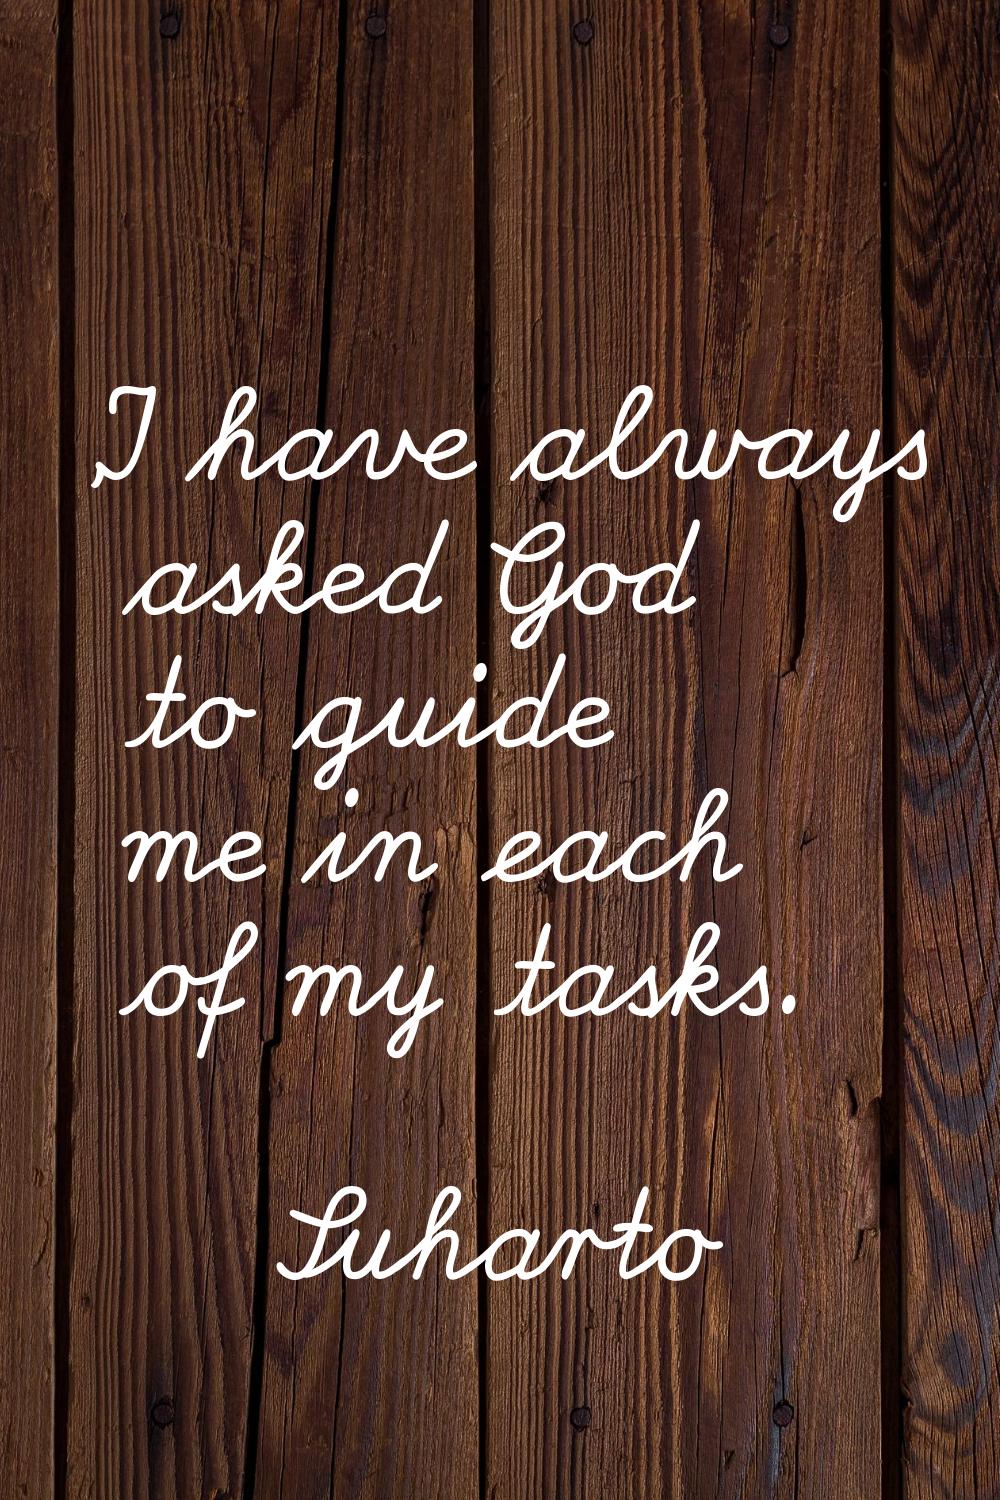 'I have always asked God to guide me in each of my tasks.